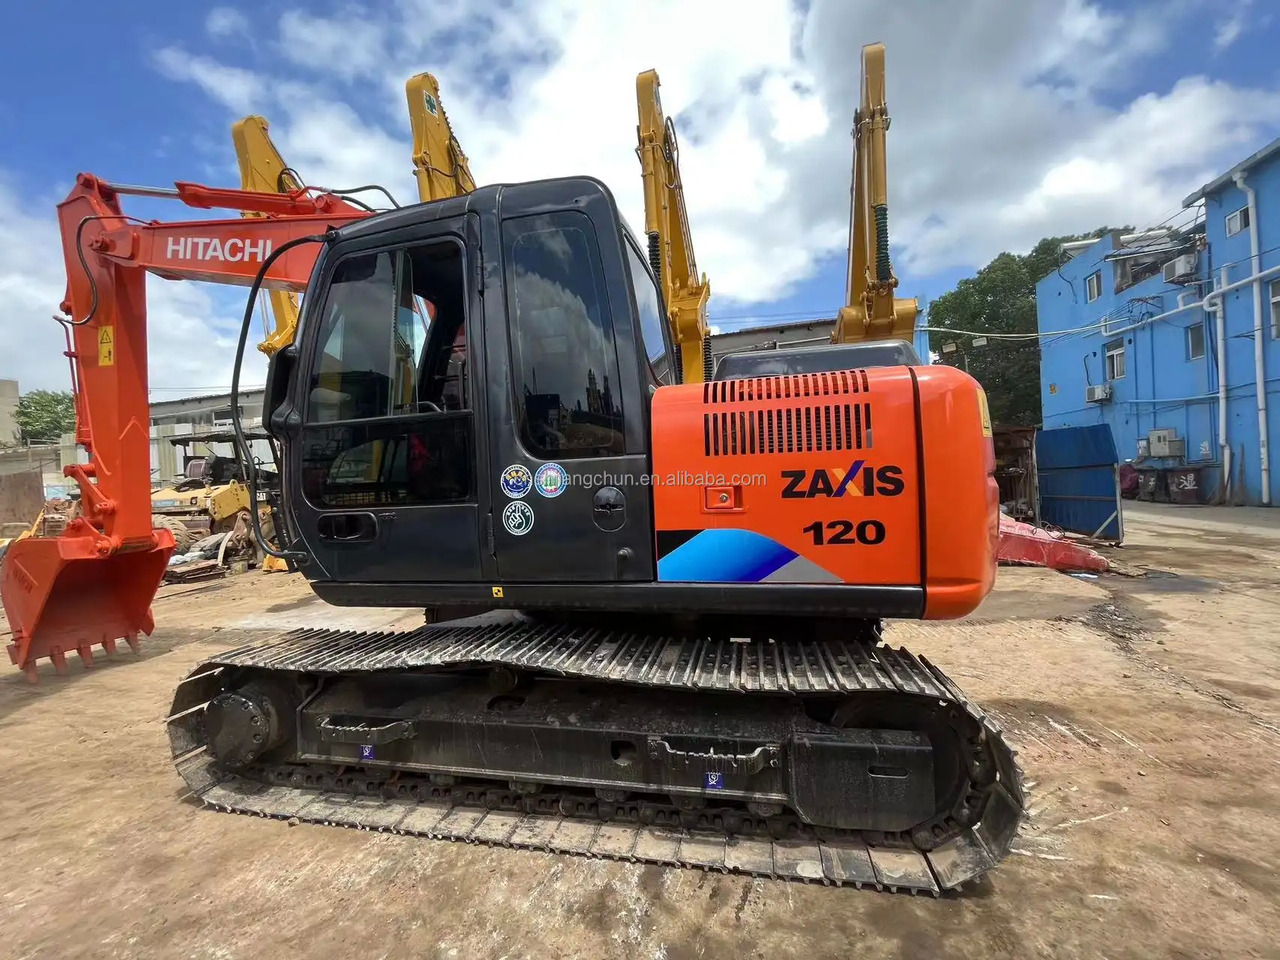 Excavadora Best Price Used Hitachi 120 Excavator Hot Sell Hitachi Zx120 With High Working Perfroance: foto 6